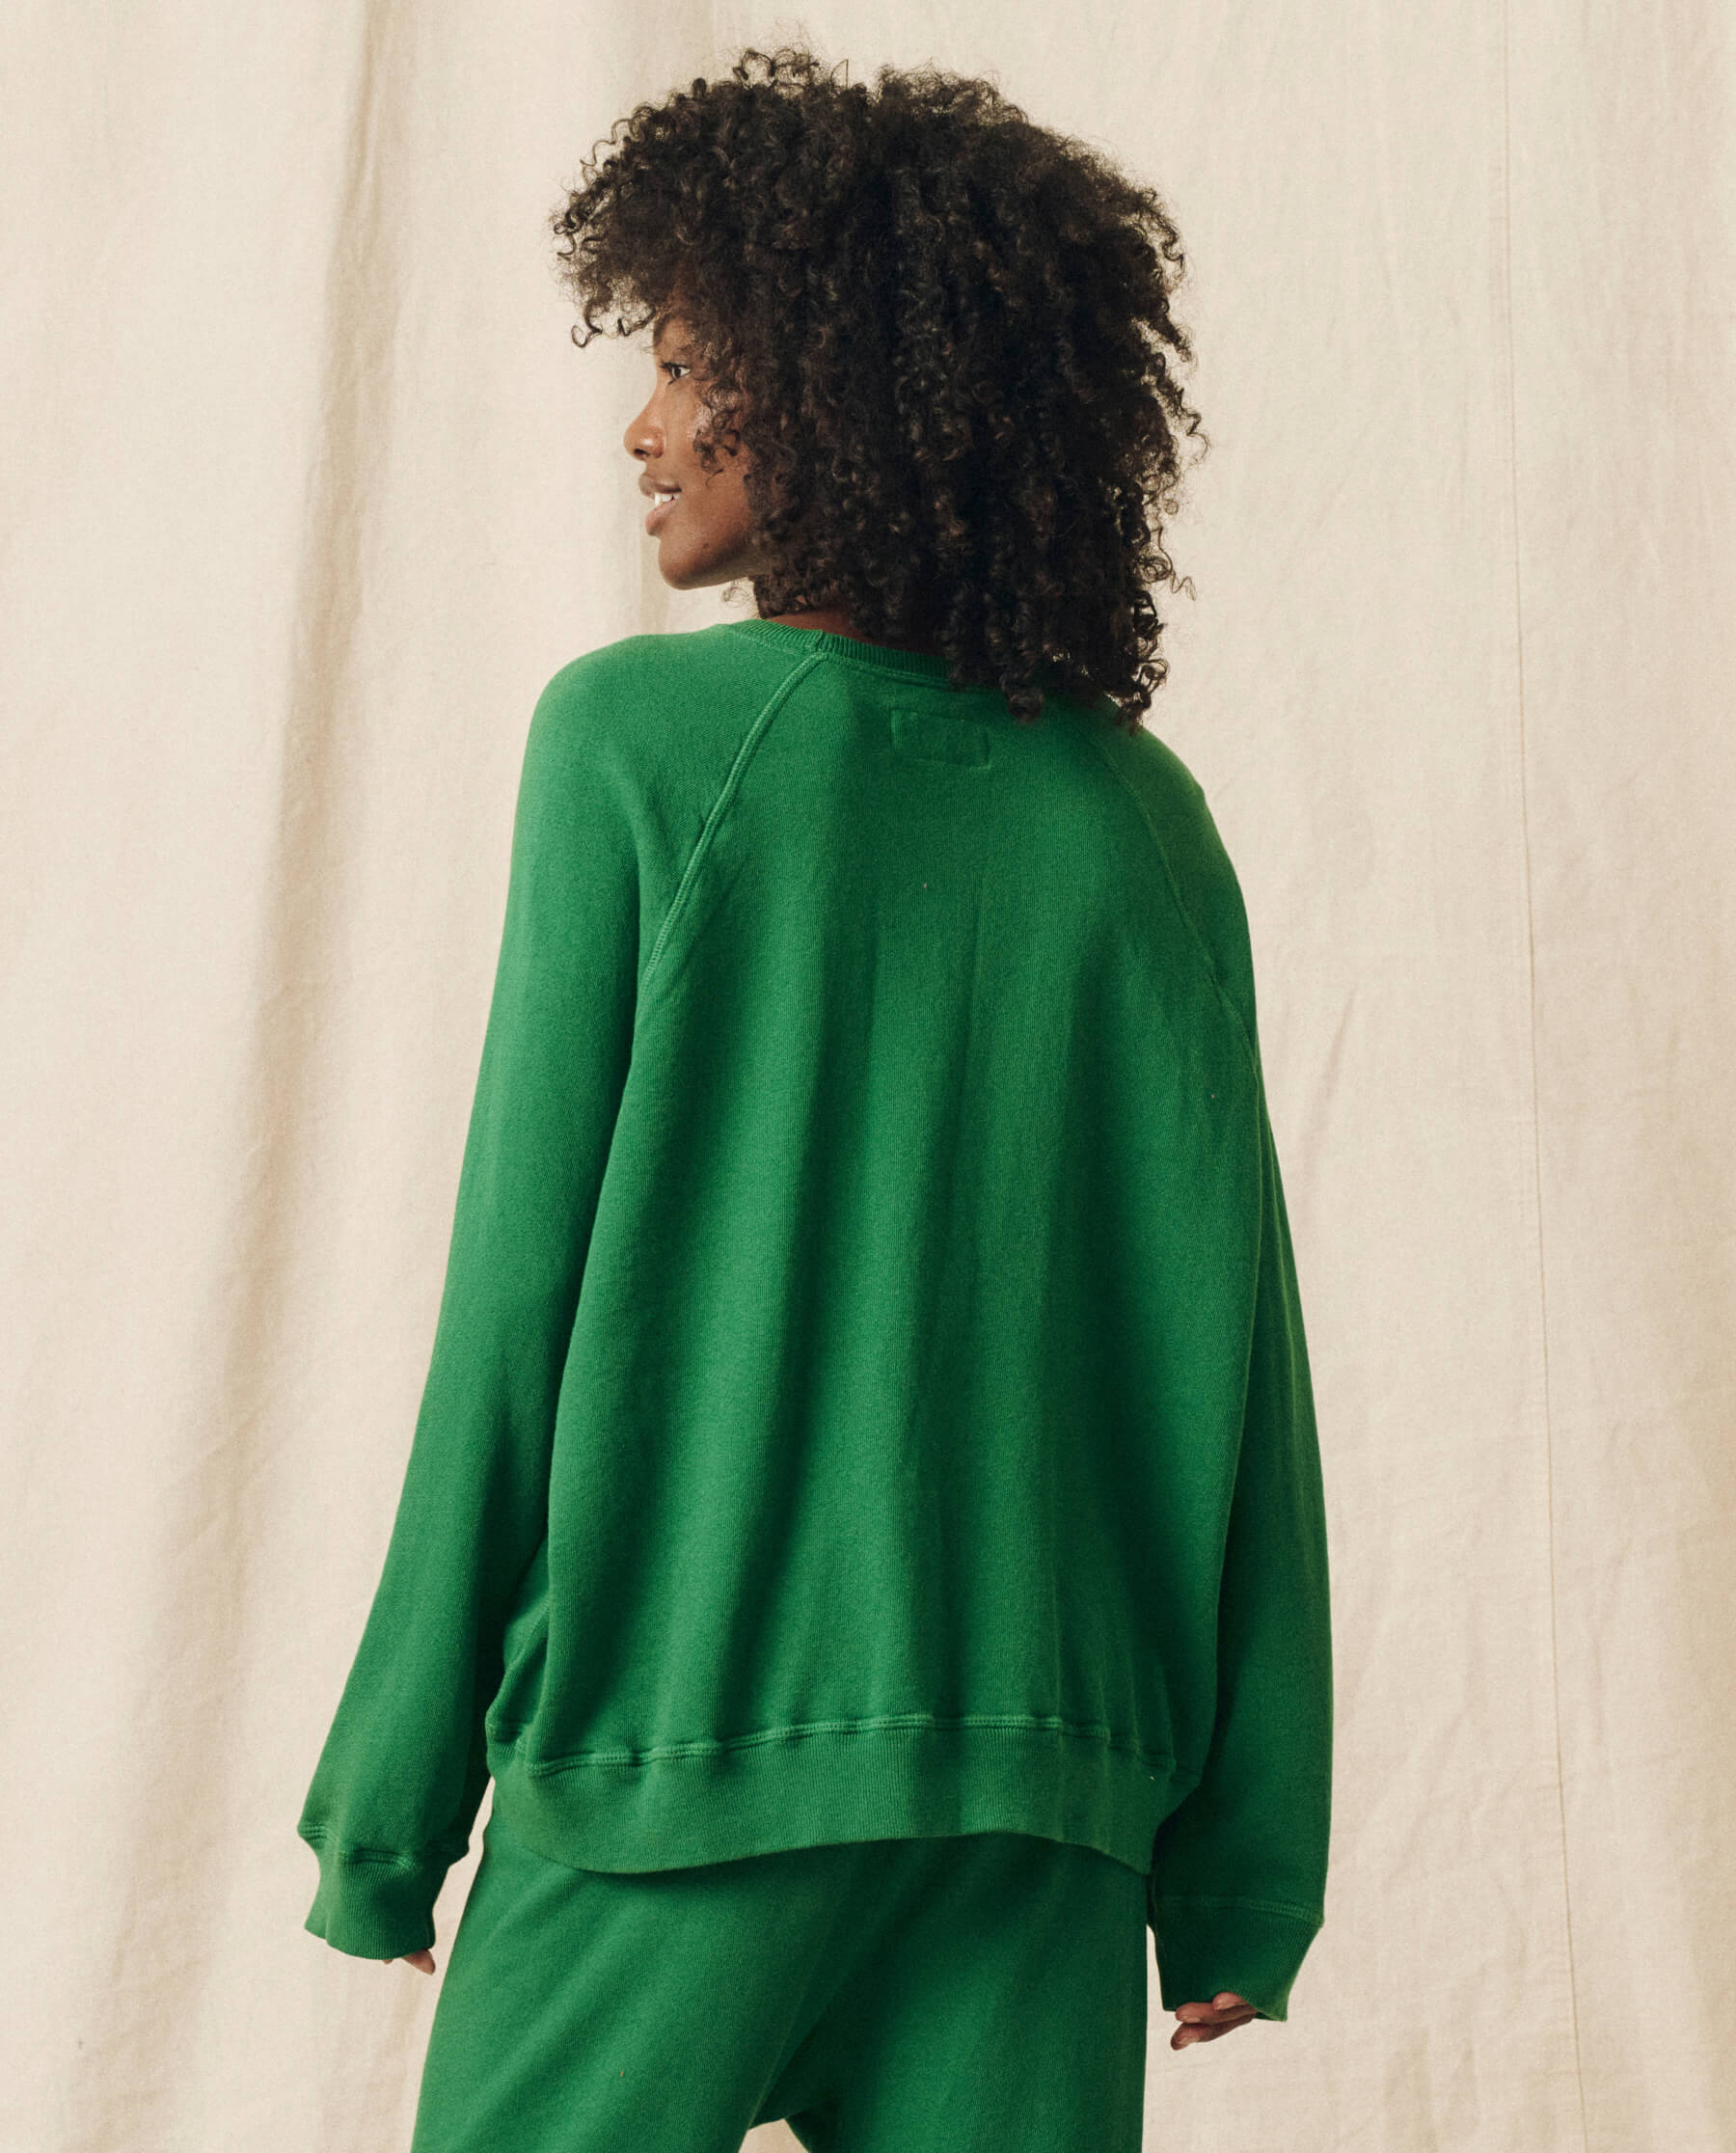 The Slouch Sweatshirt. Solid -- Holly Leaf SWEATSHIRTS THE GREAT. HOL 23 KNITS